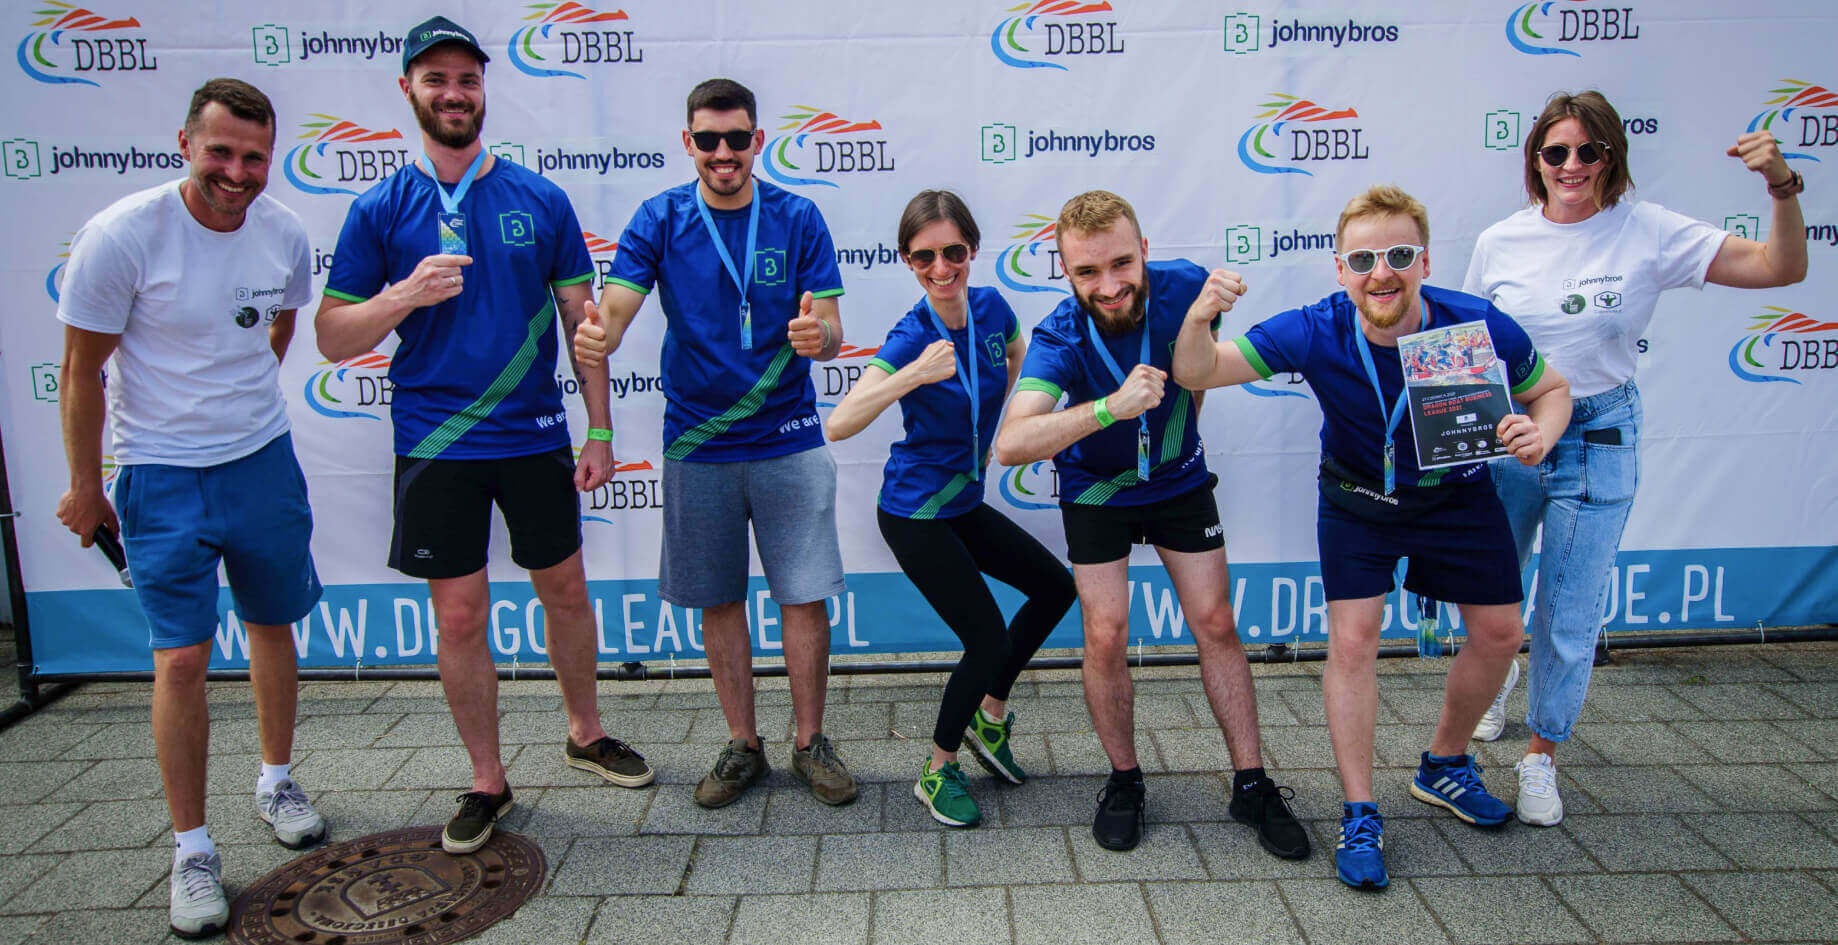 Wioslujeszpomagasz johnnybros participated in dragon boat business league 2021